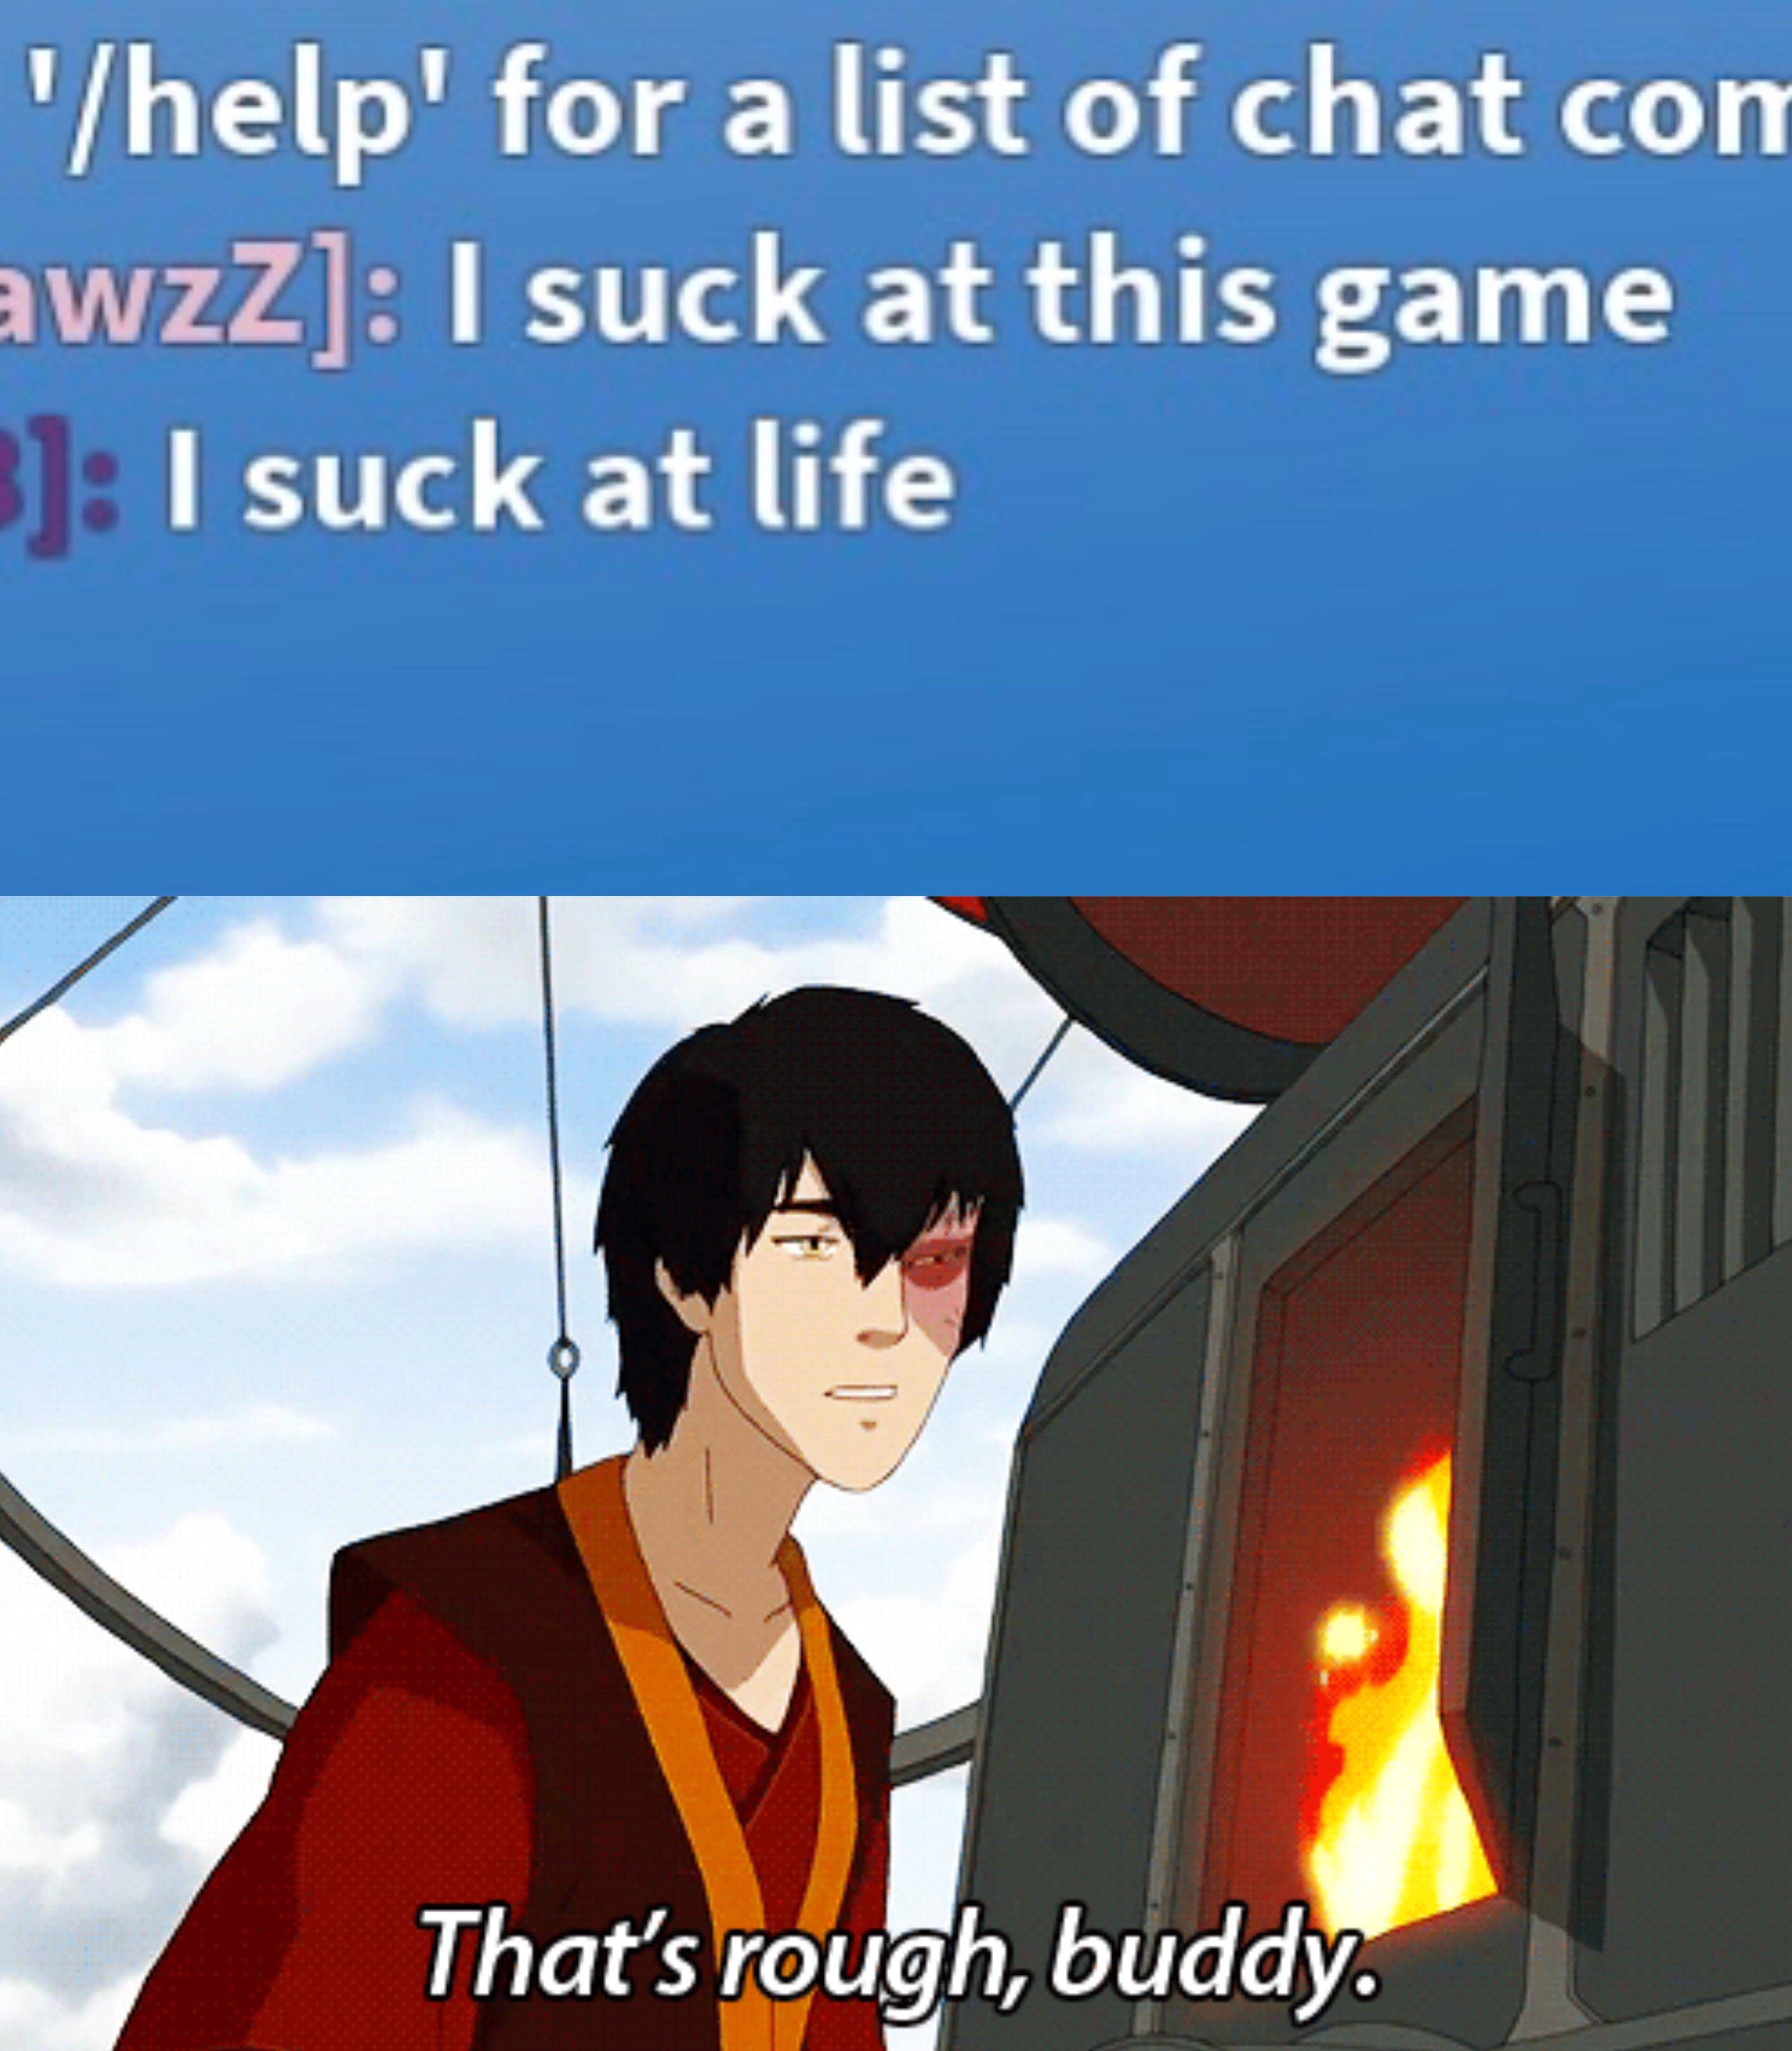 dank memes - zuko that's rough buddy gif - 'help' for a list of chat con awzz I suck at this game I suck at life That's rough, buddy.